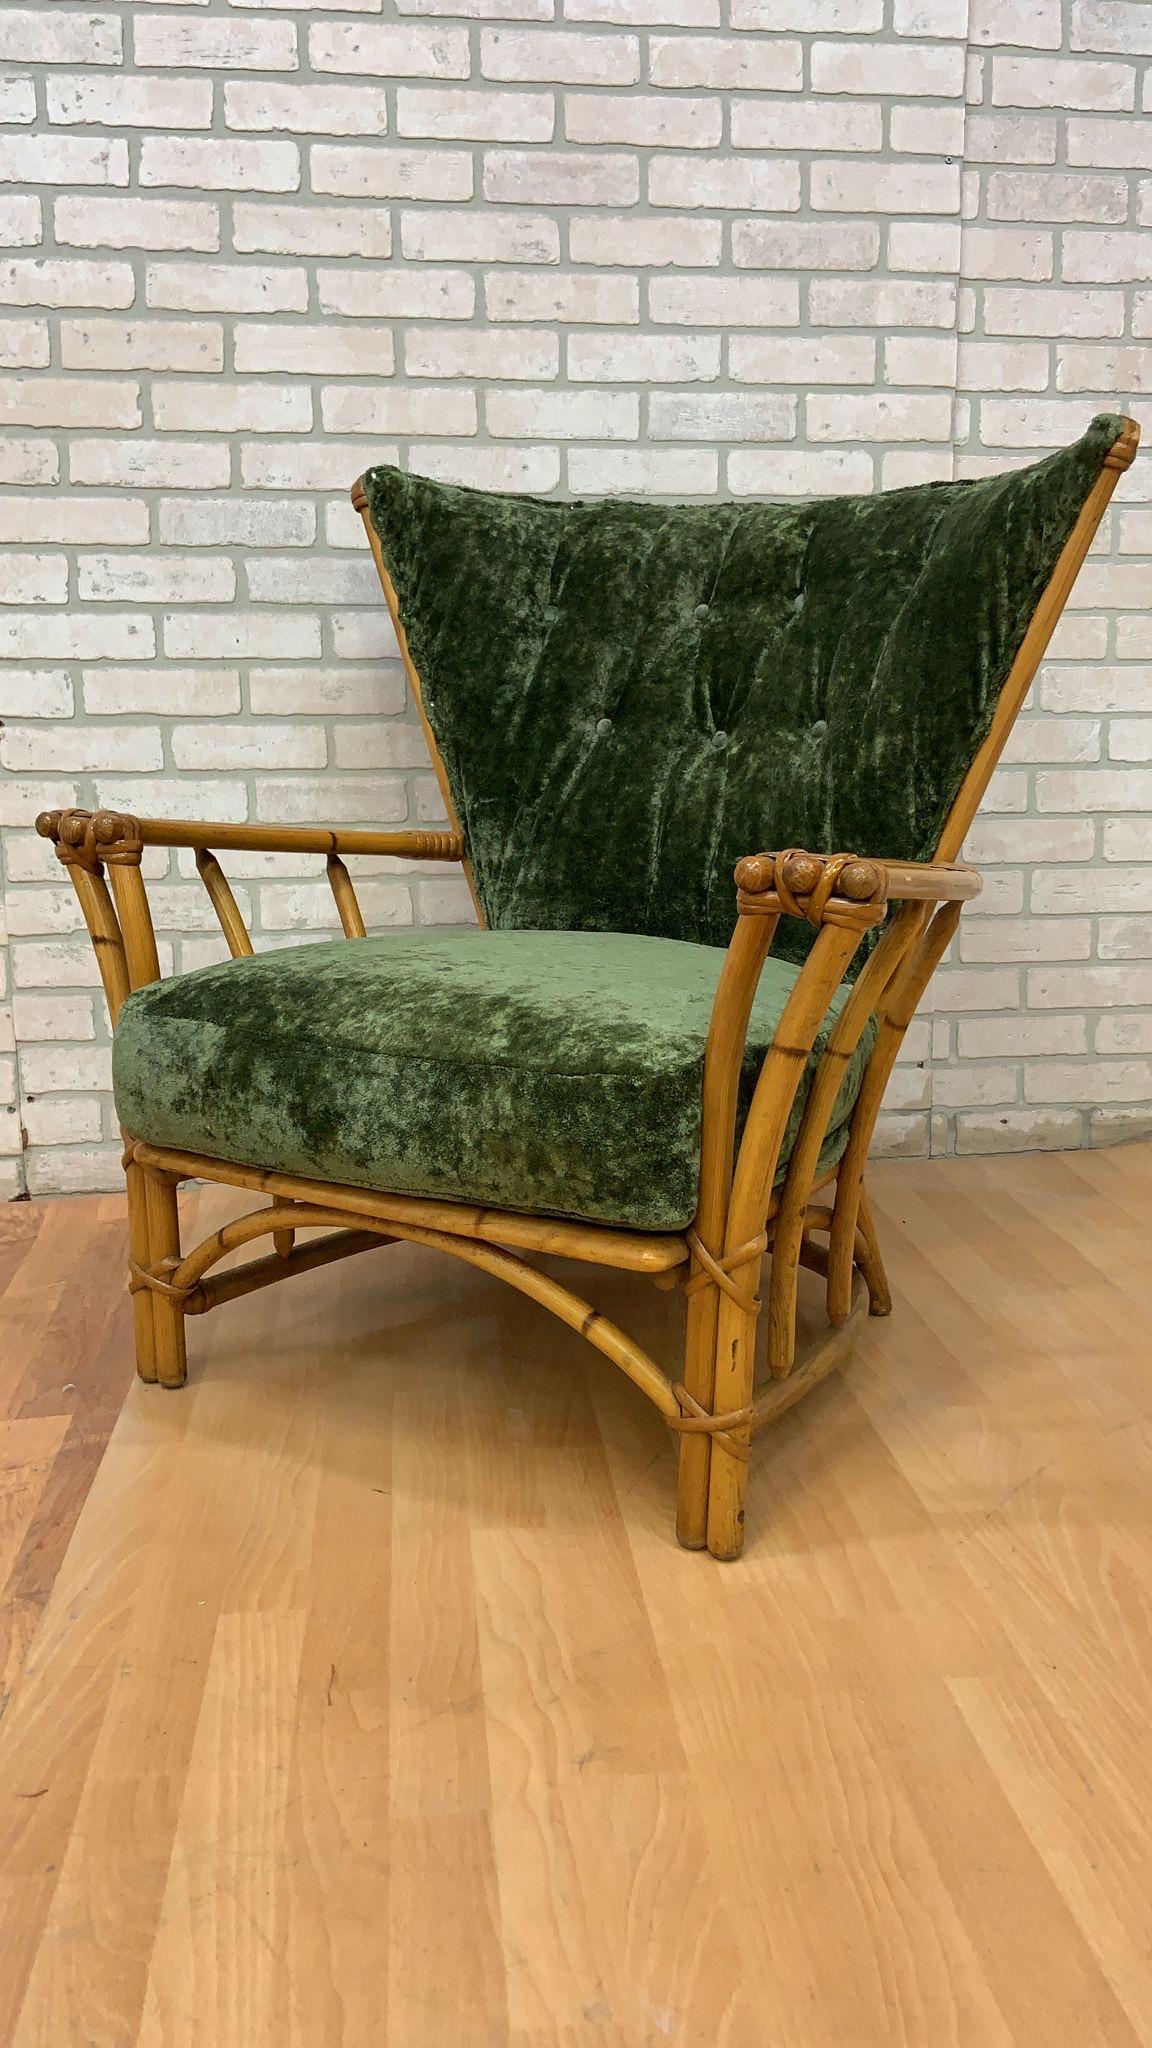 MCM Heywood Wakefield Ashcraft Rattan Lounge Chairs Newly Upholstered - Set of 2 For Sale 2